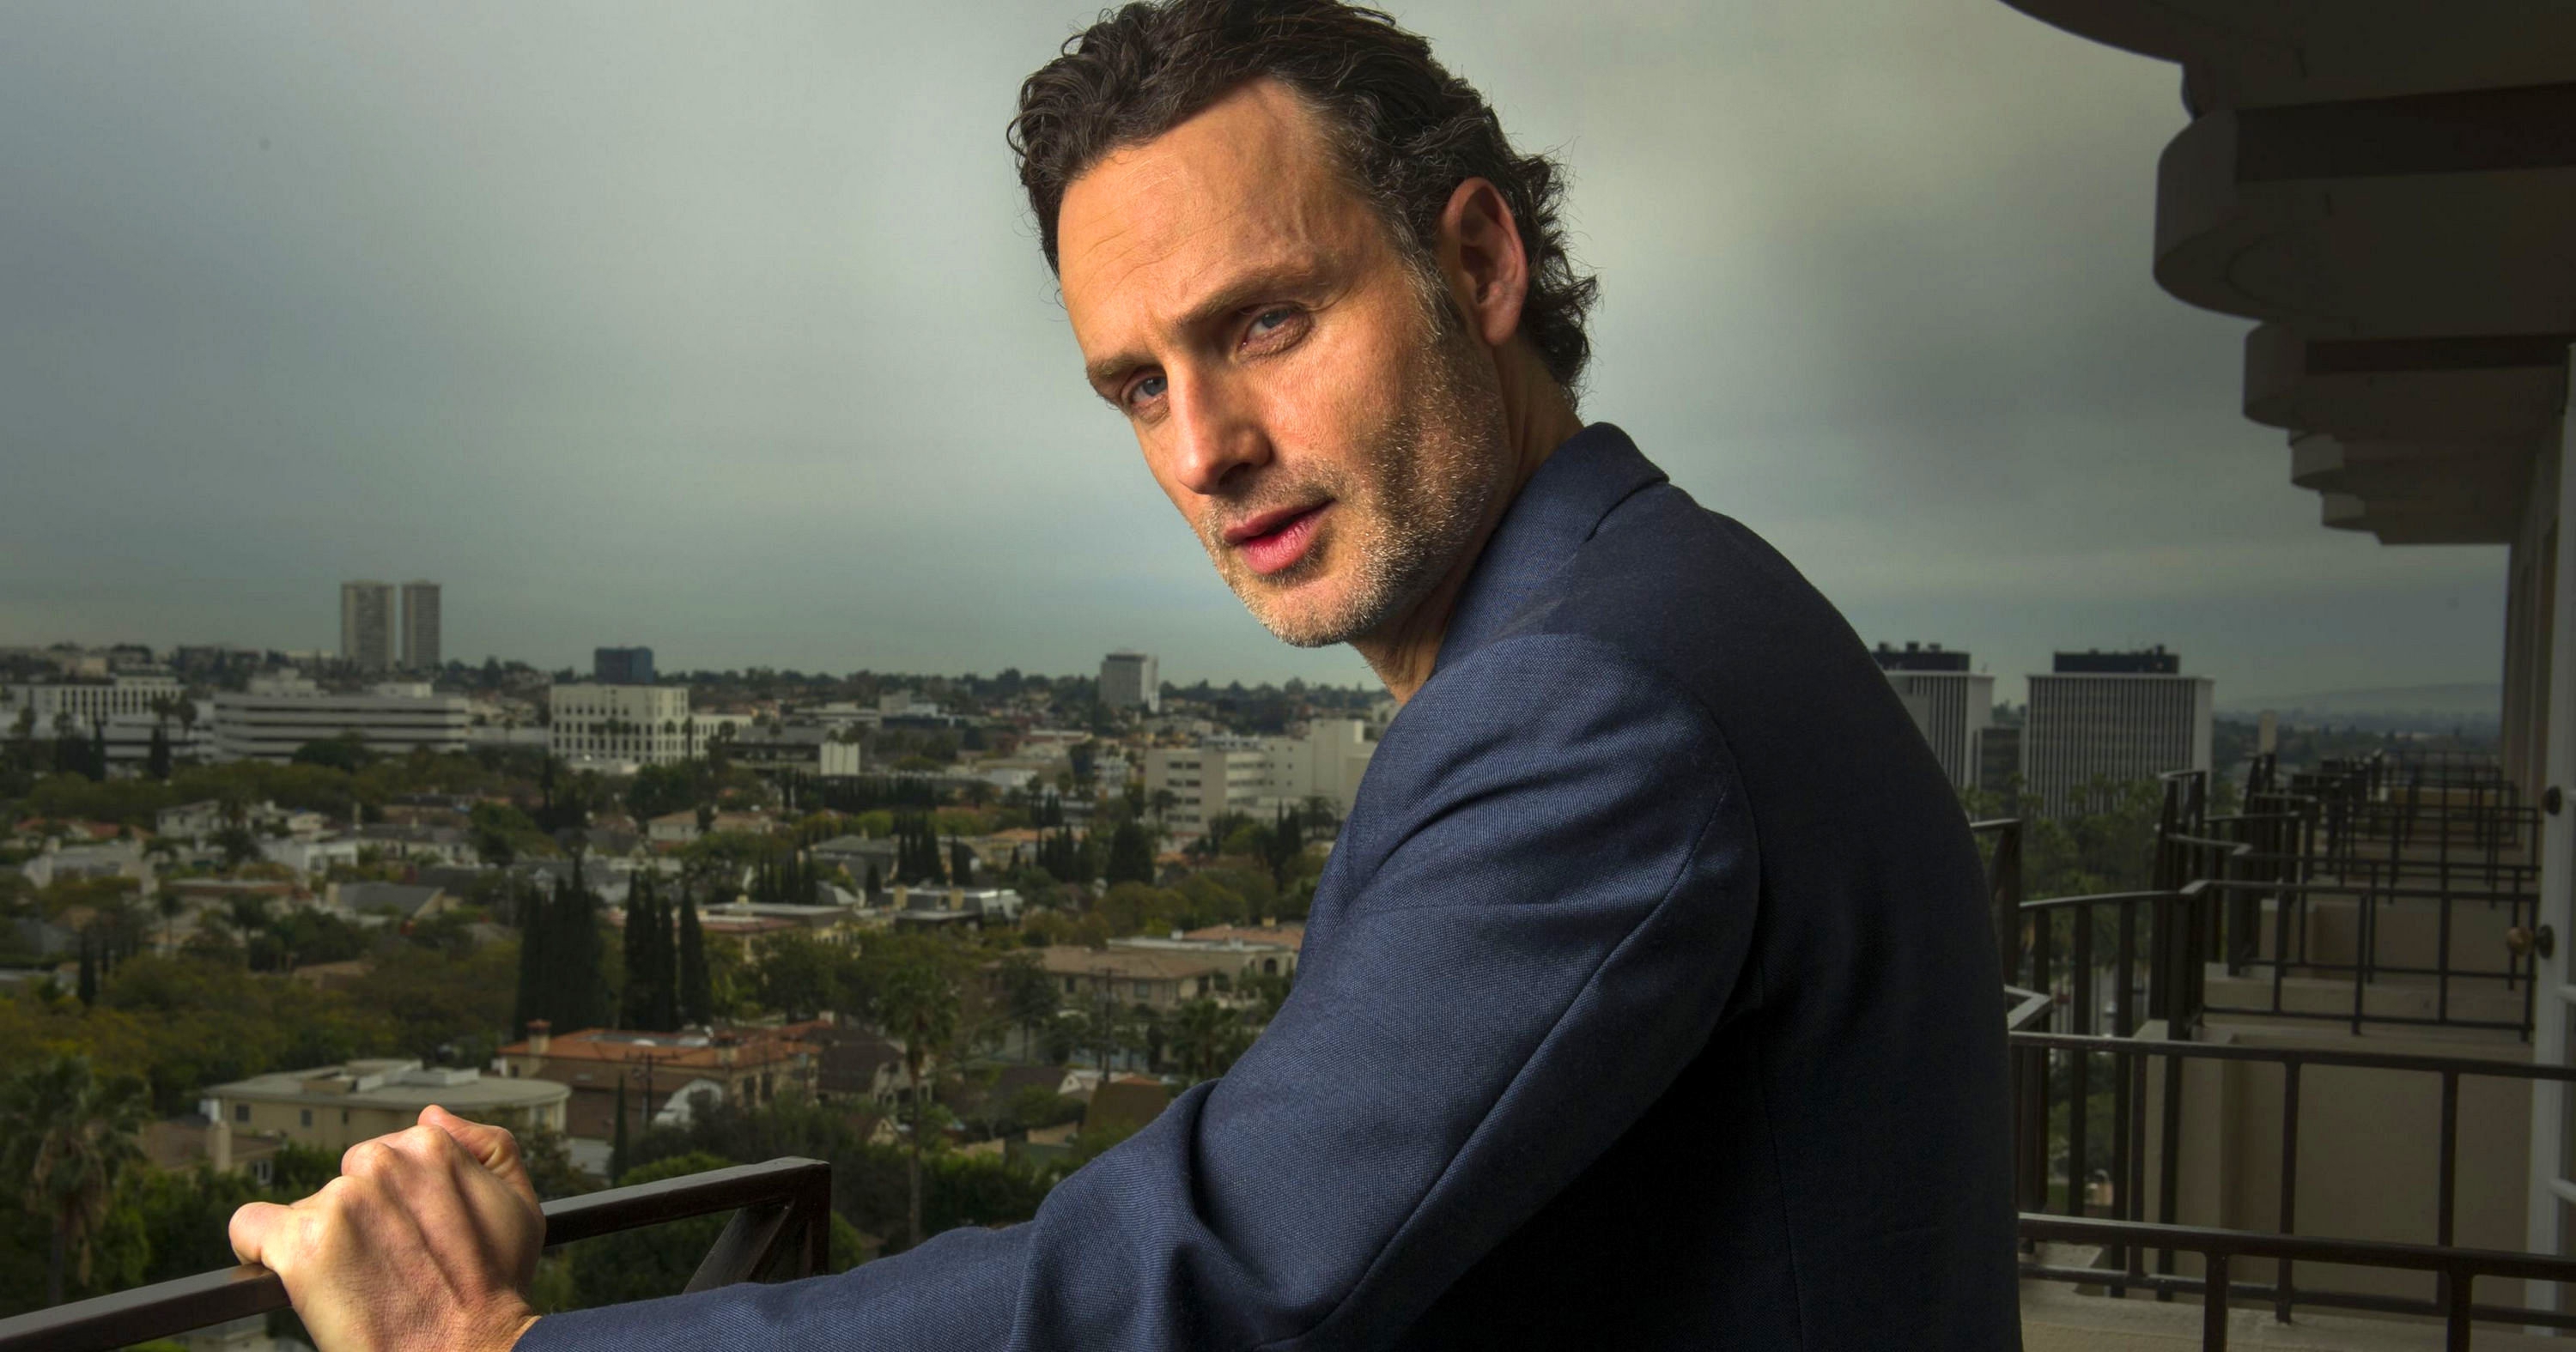 Andrew Lincoln Wallpapers Images Photos Pictures Backgrounds3000 x 1575